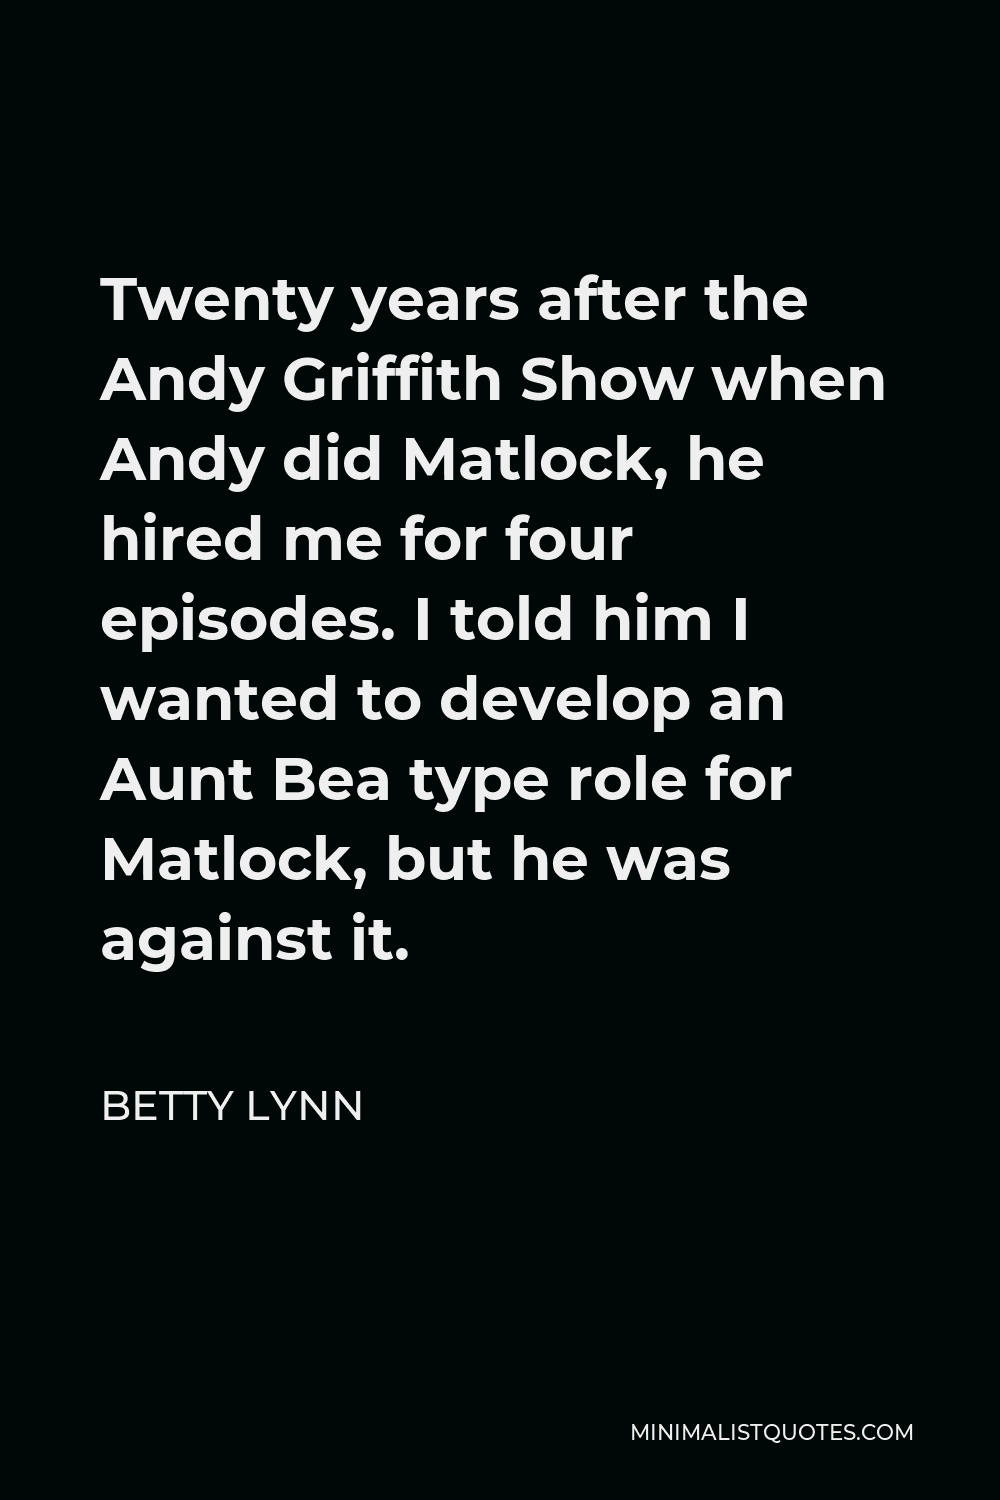 Betty Lynn Quote - Twenty years after the Andy Griffith Show when Andy did Matlock, he hired me for four episodes. I told him I wanted to develop an Aunt Bea type role for Matlock, but he was against it.